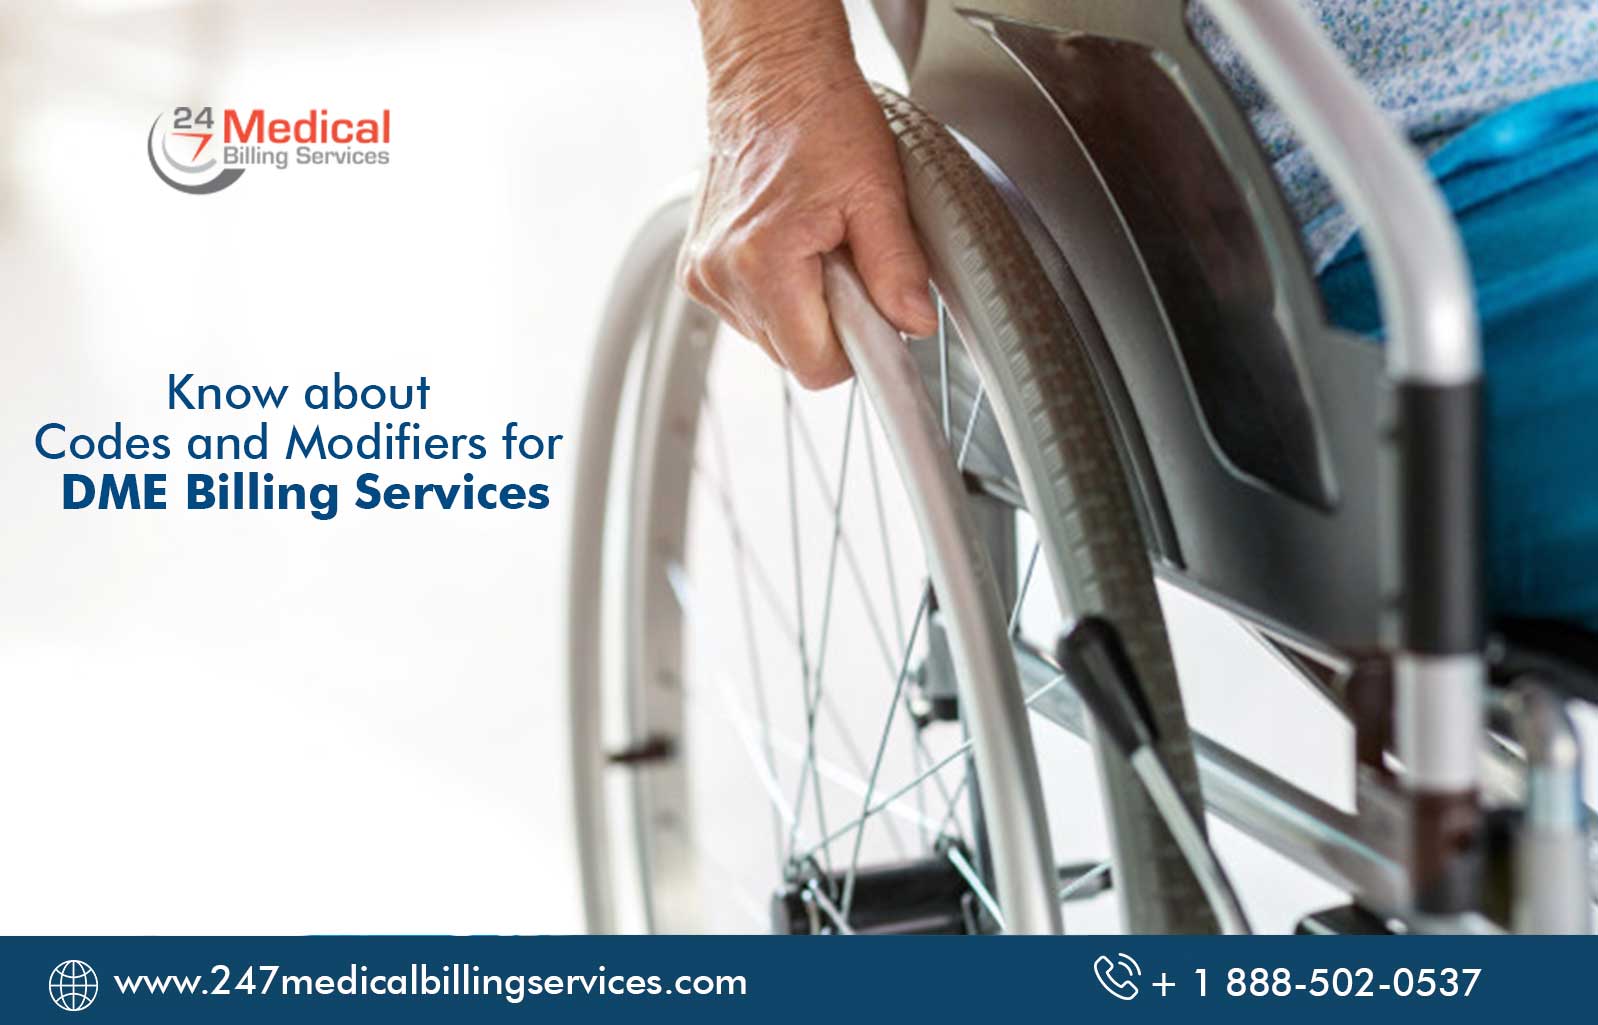 Know about Codes and Modifiers for DME Billing Services 24/7 Medical